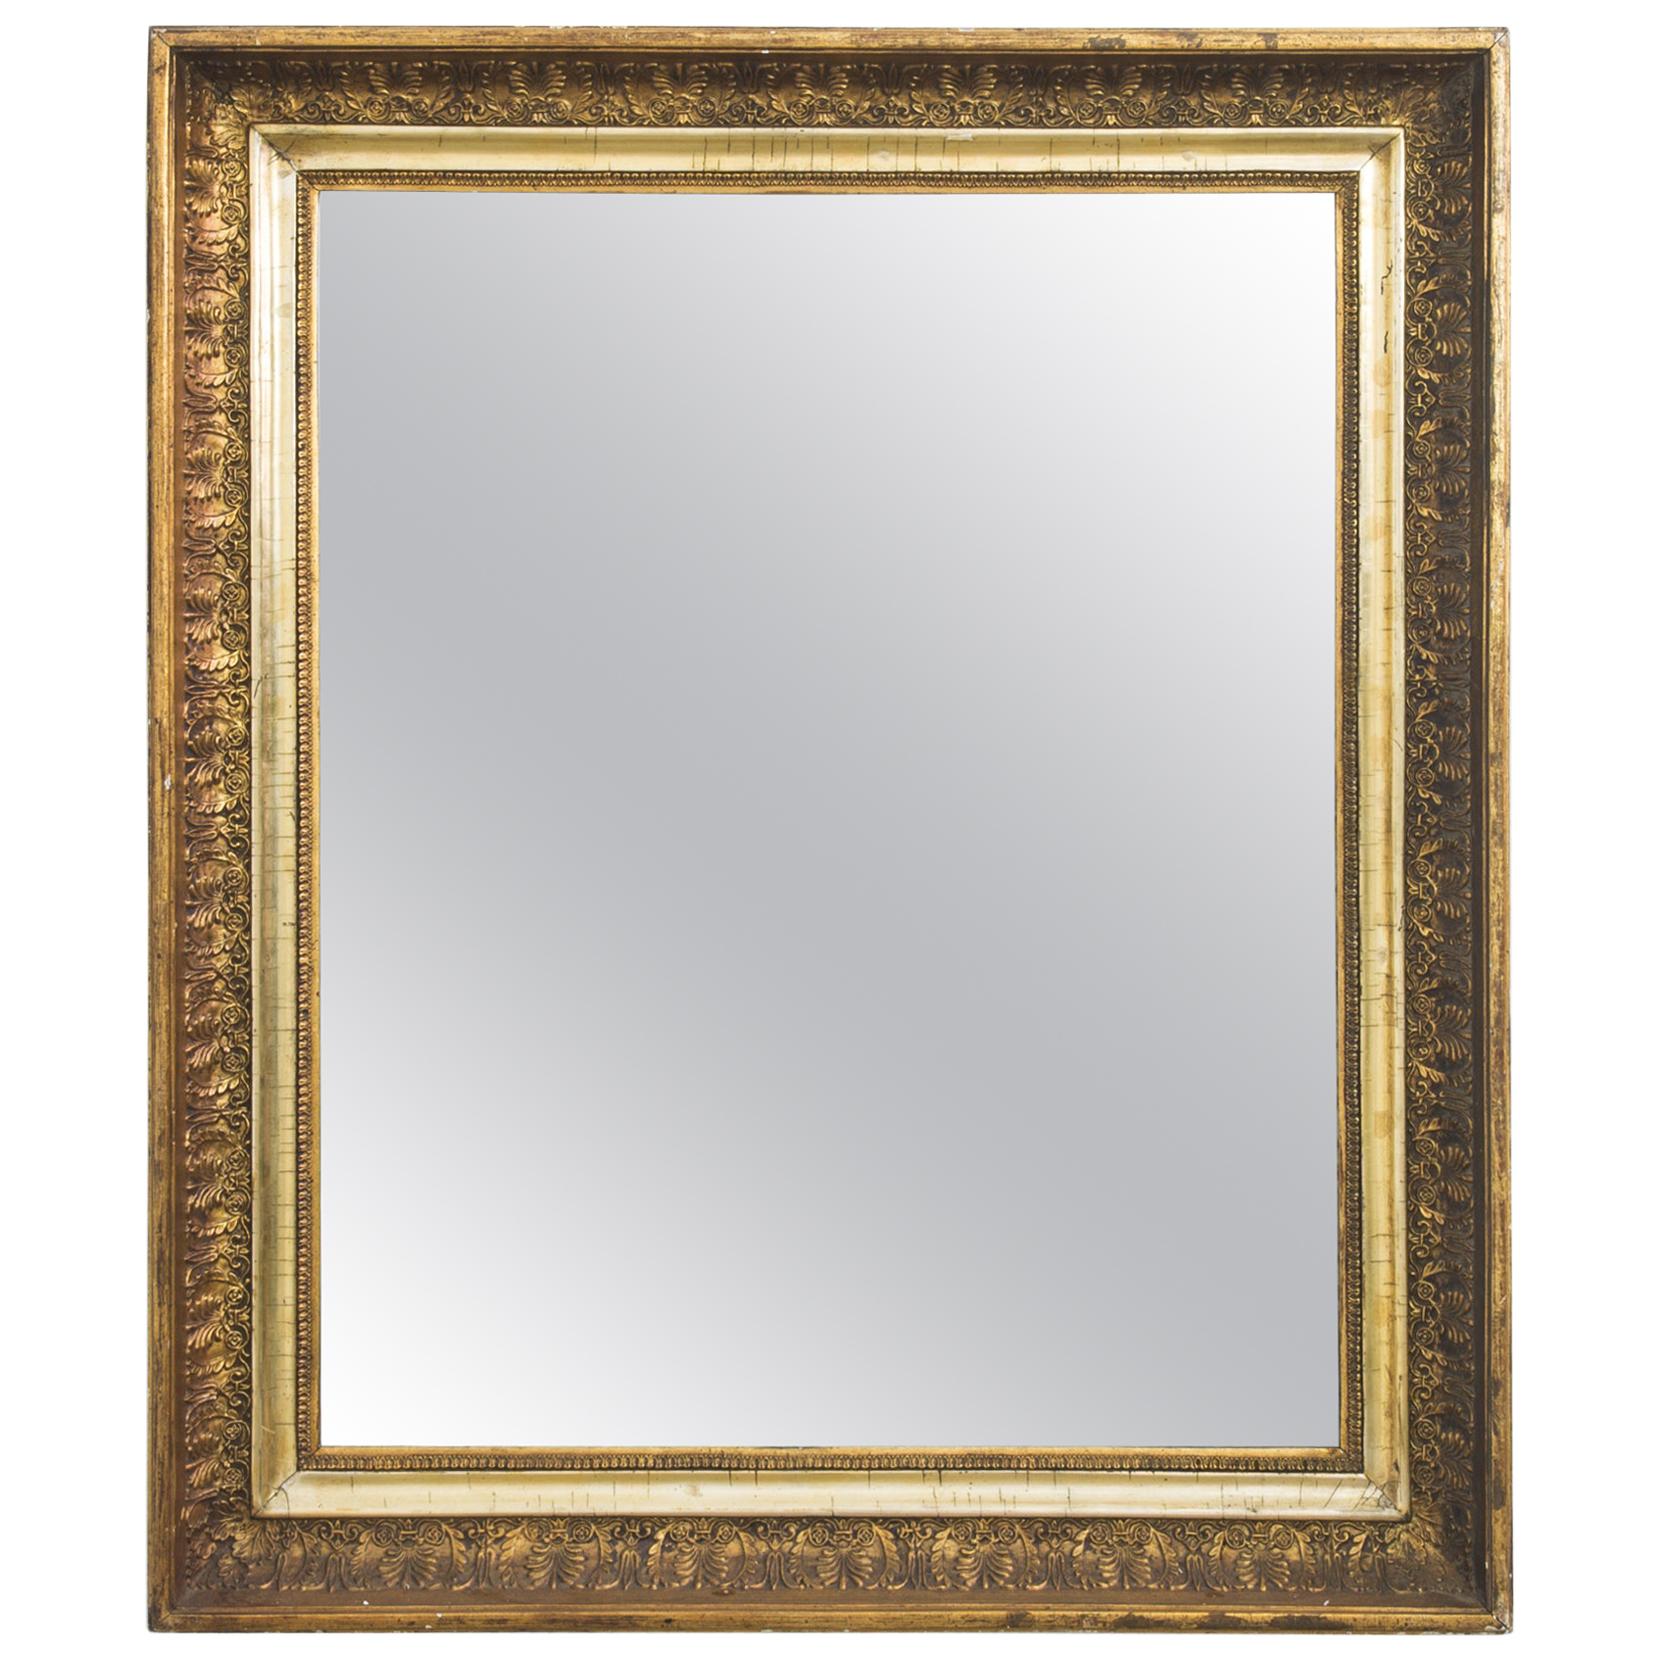 1870s French Gilded Square Mirror